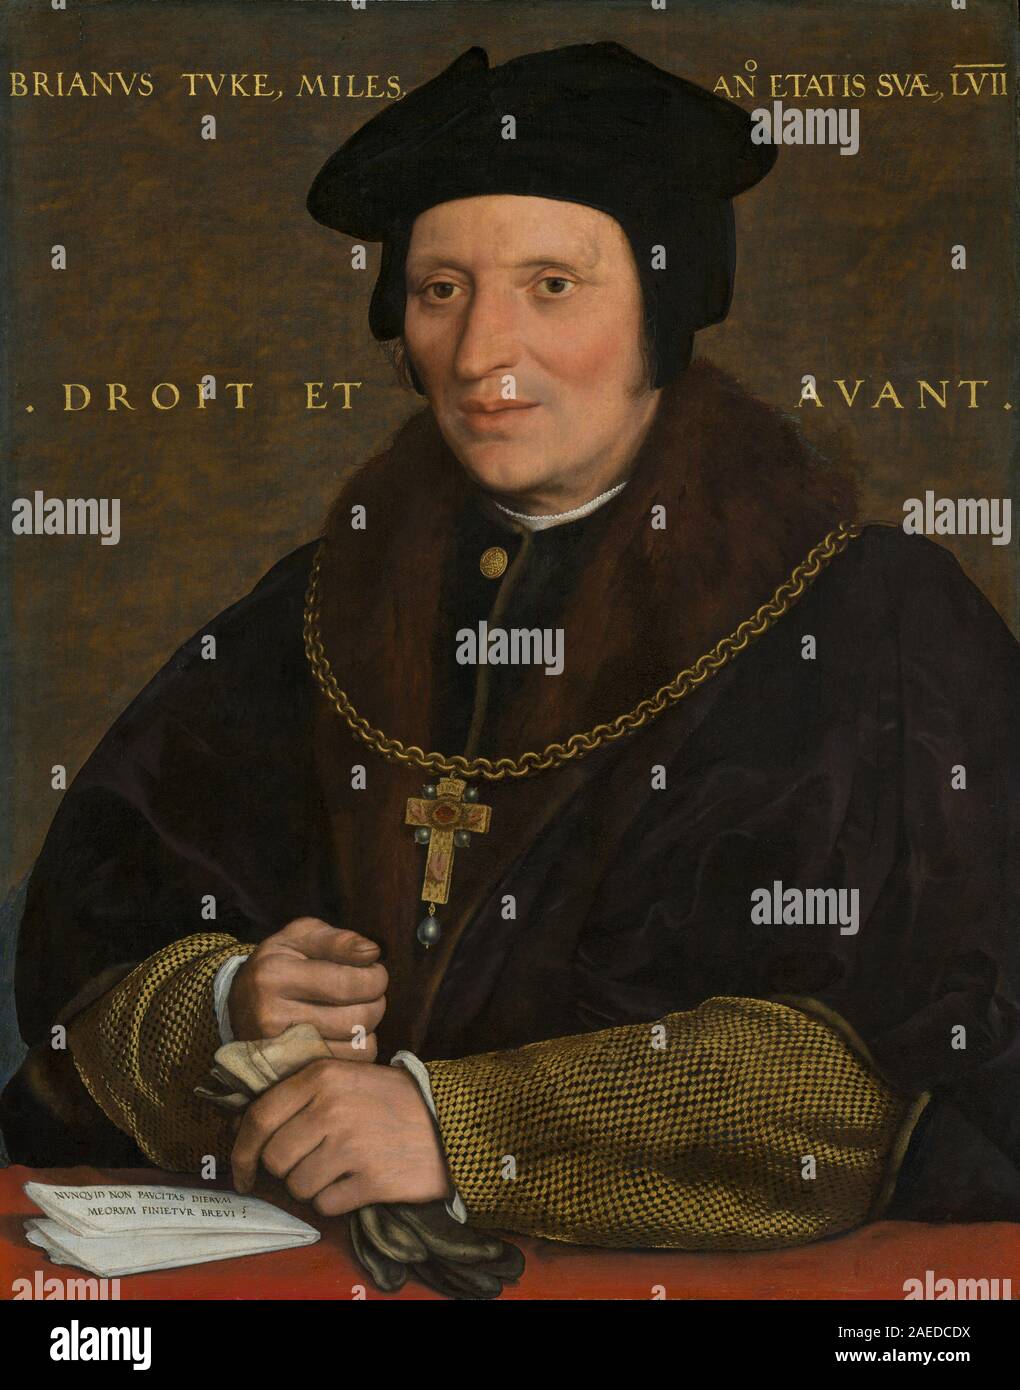 Hans Holbein the Younger, Sir Brian Tuke, c 1527-1528 or c 1532-1534 Sir Brian Tuke; c. 1527/1528 or c. 1532/1534 Stock Photo